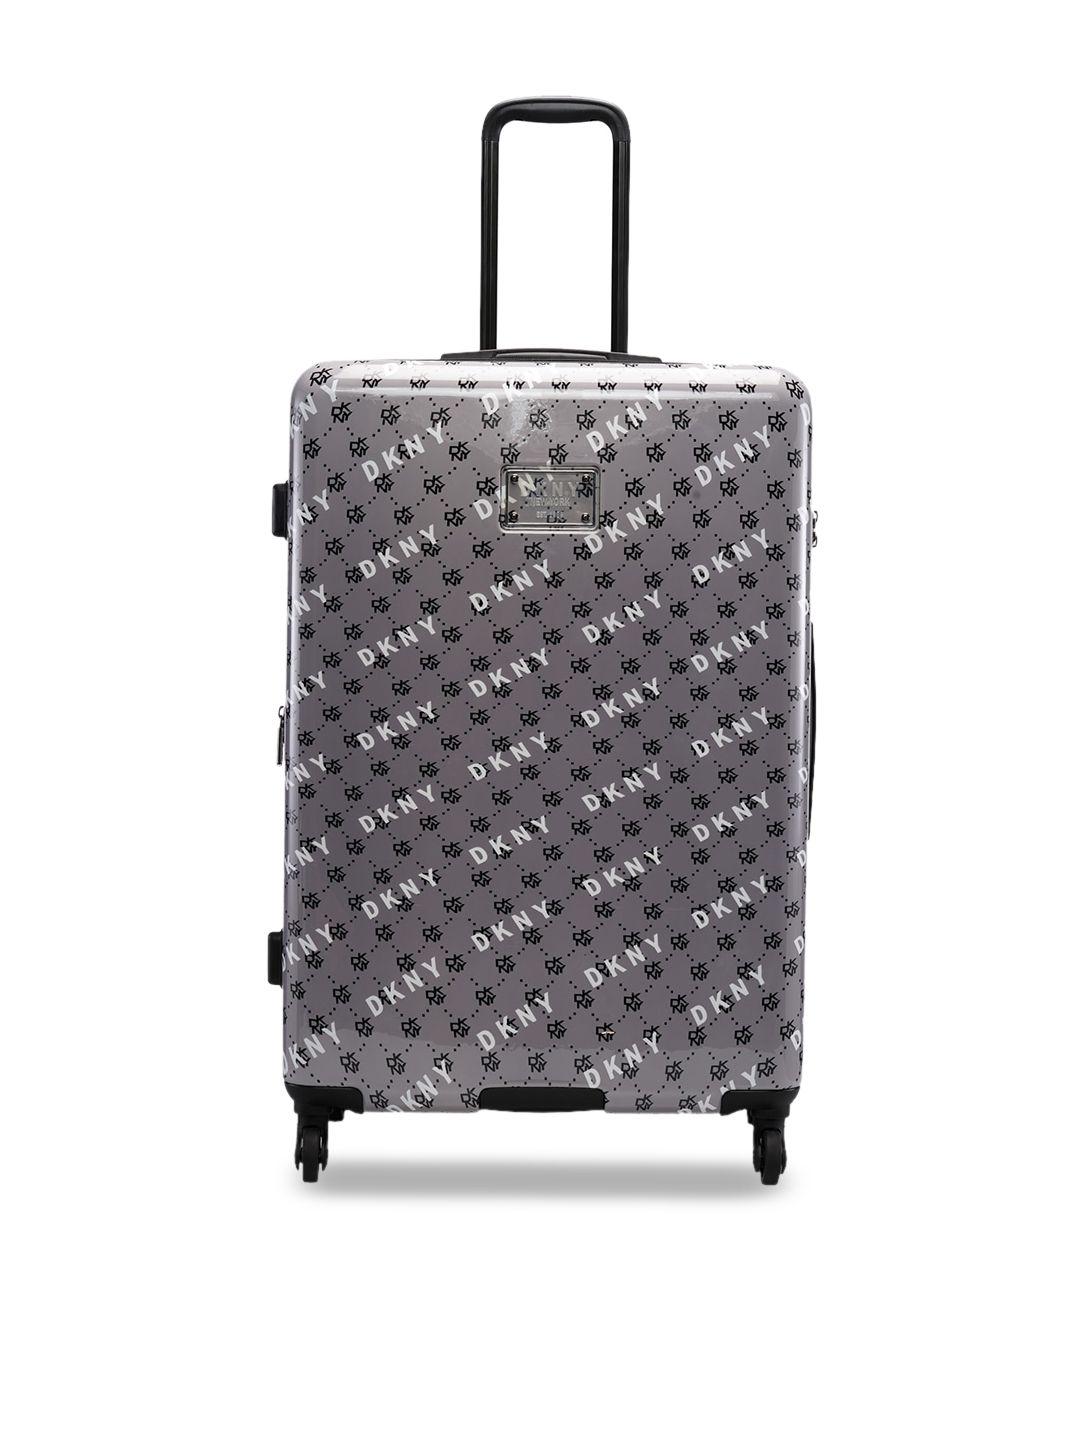 dkny printed abs material hard-sided large trolley suitcase